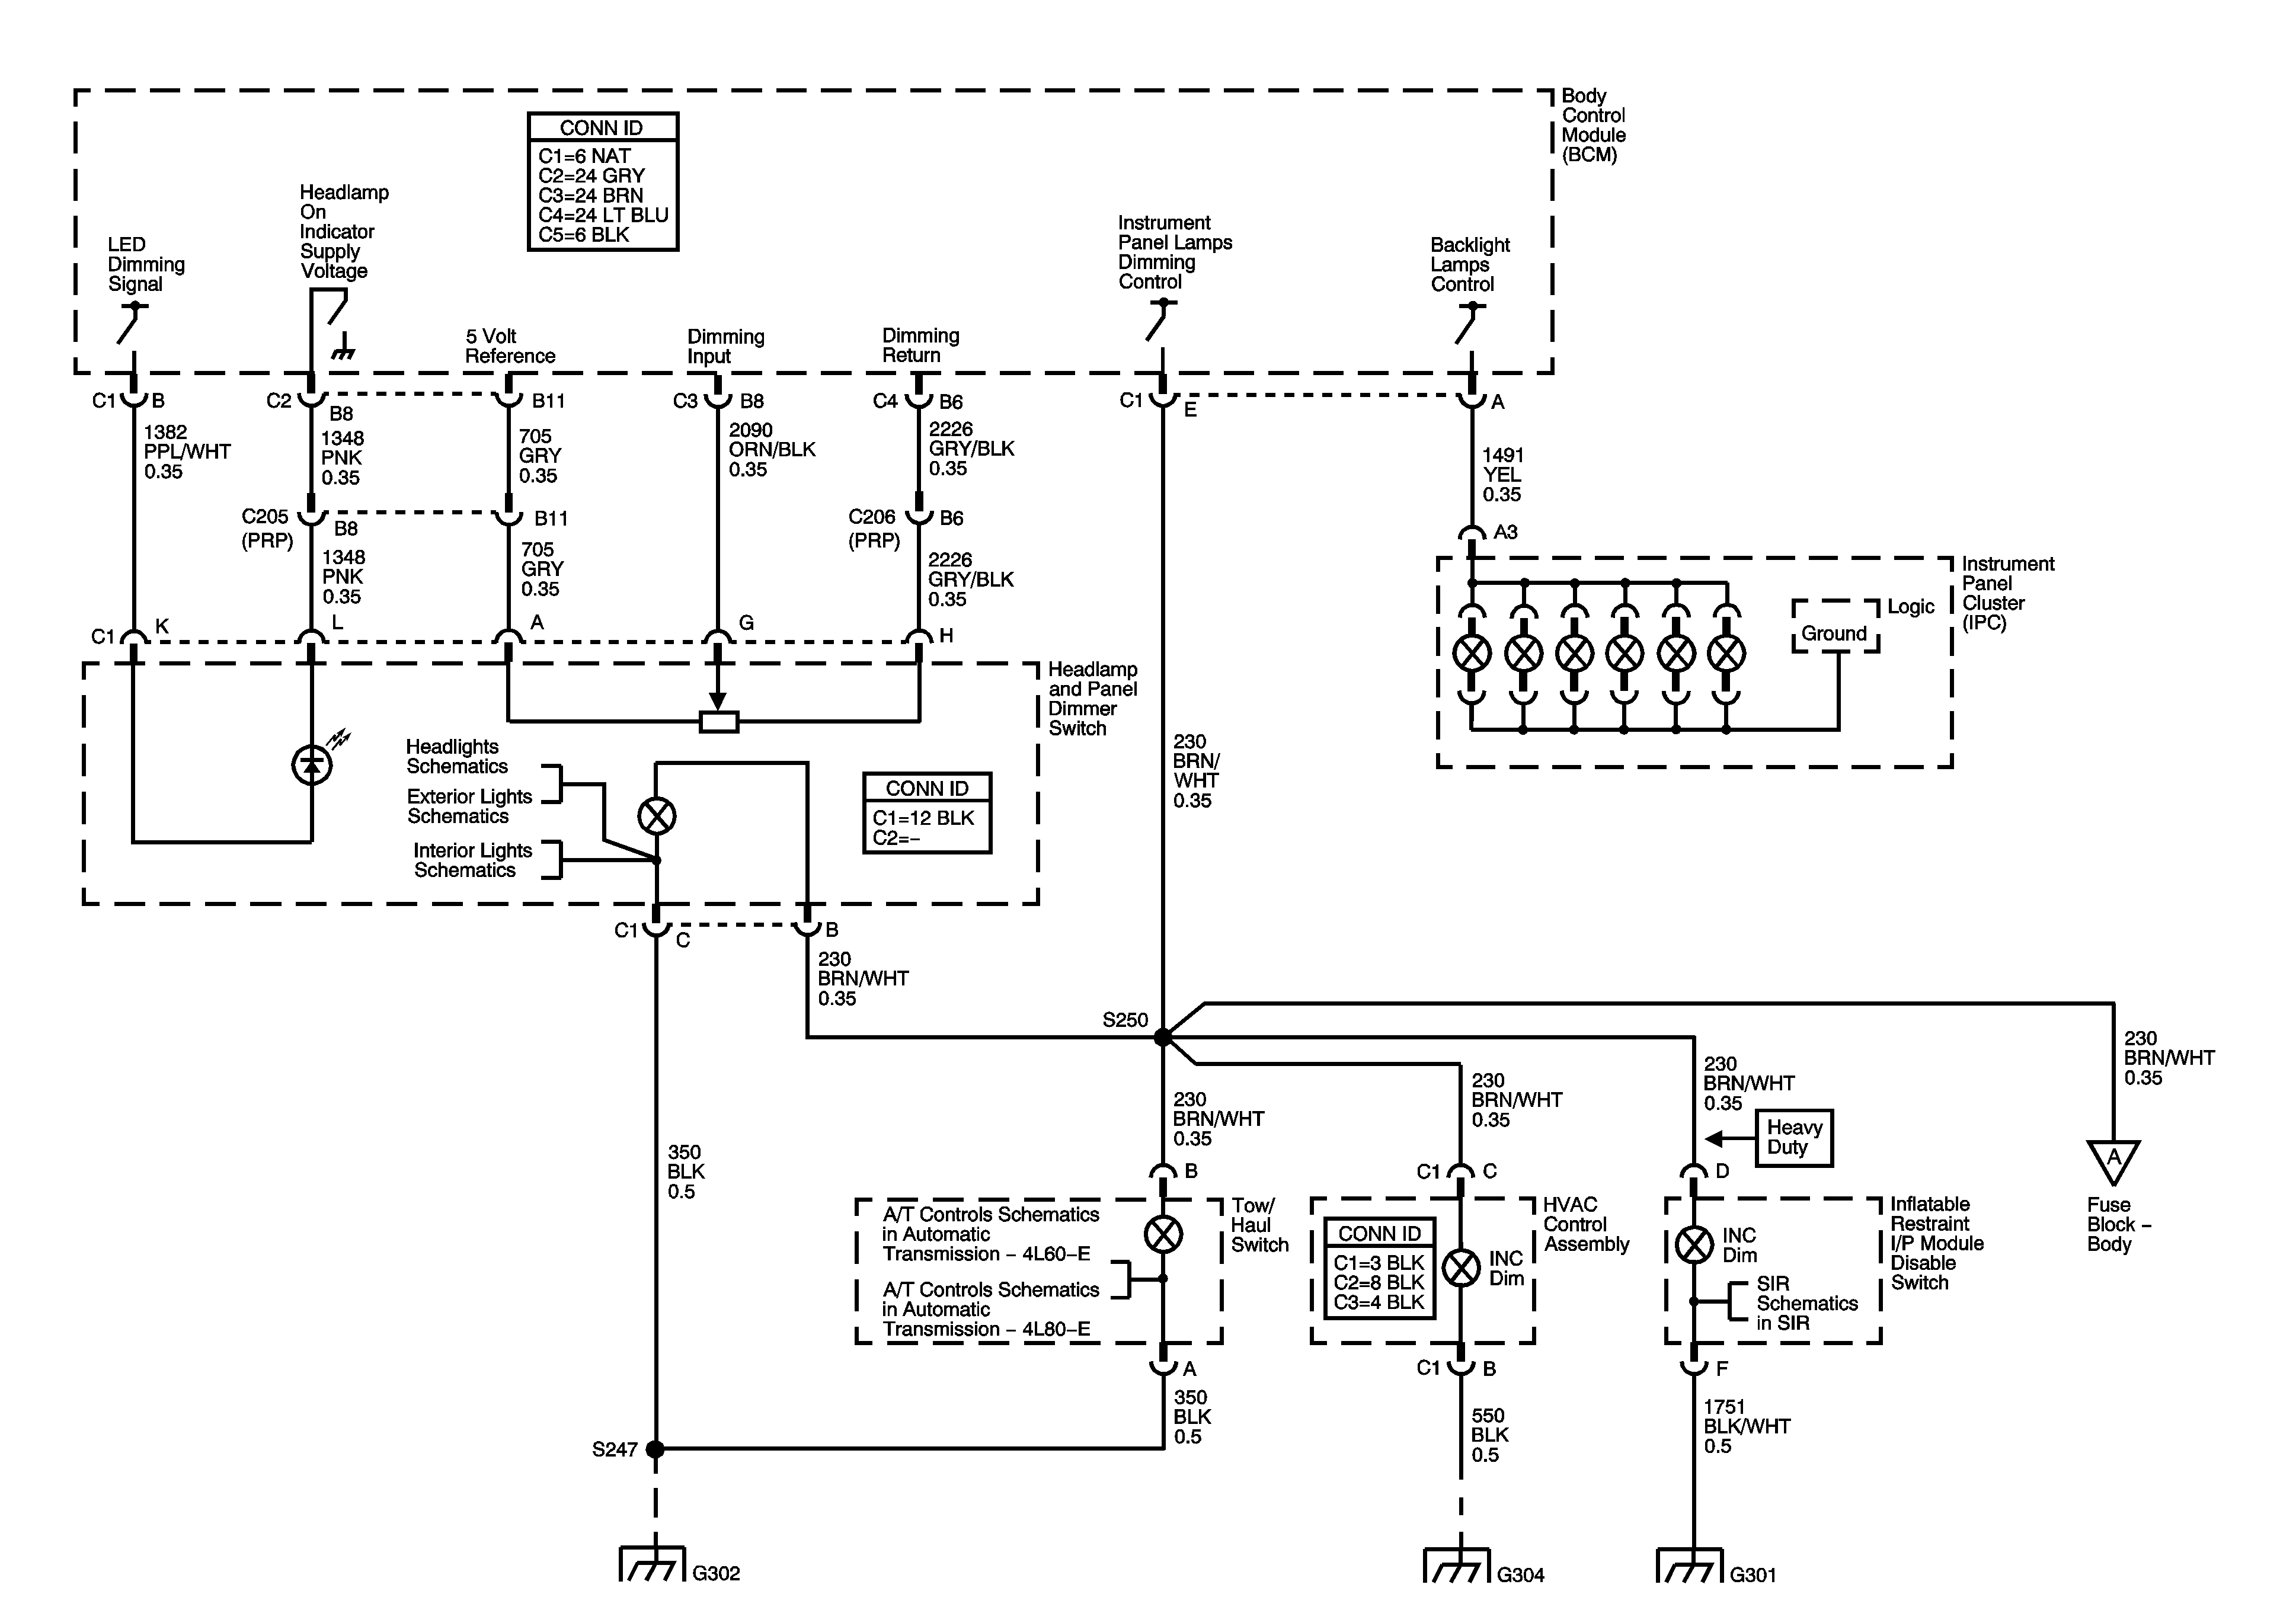 2005 Gmc C7500 Cruise Control Wiring Diagram from www.next.gr